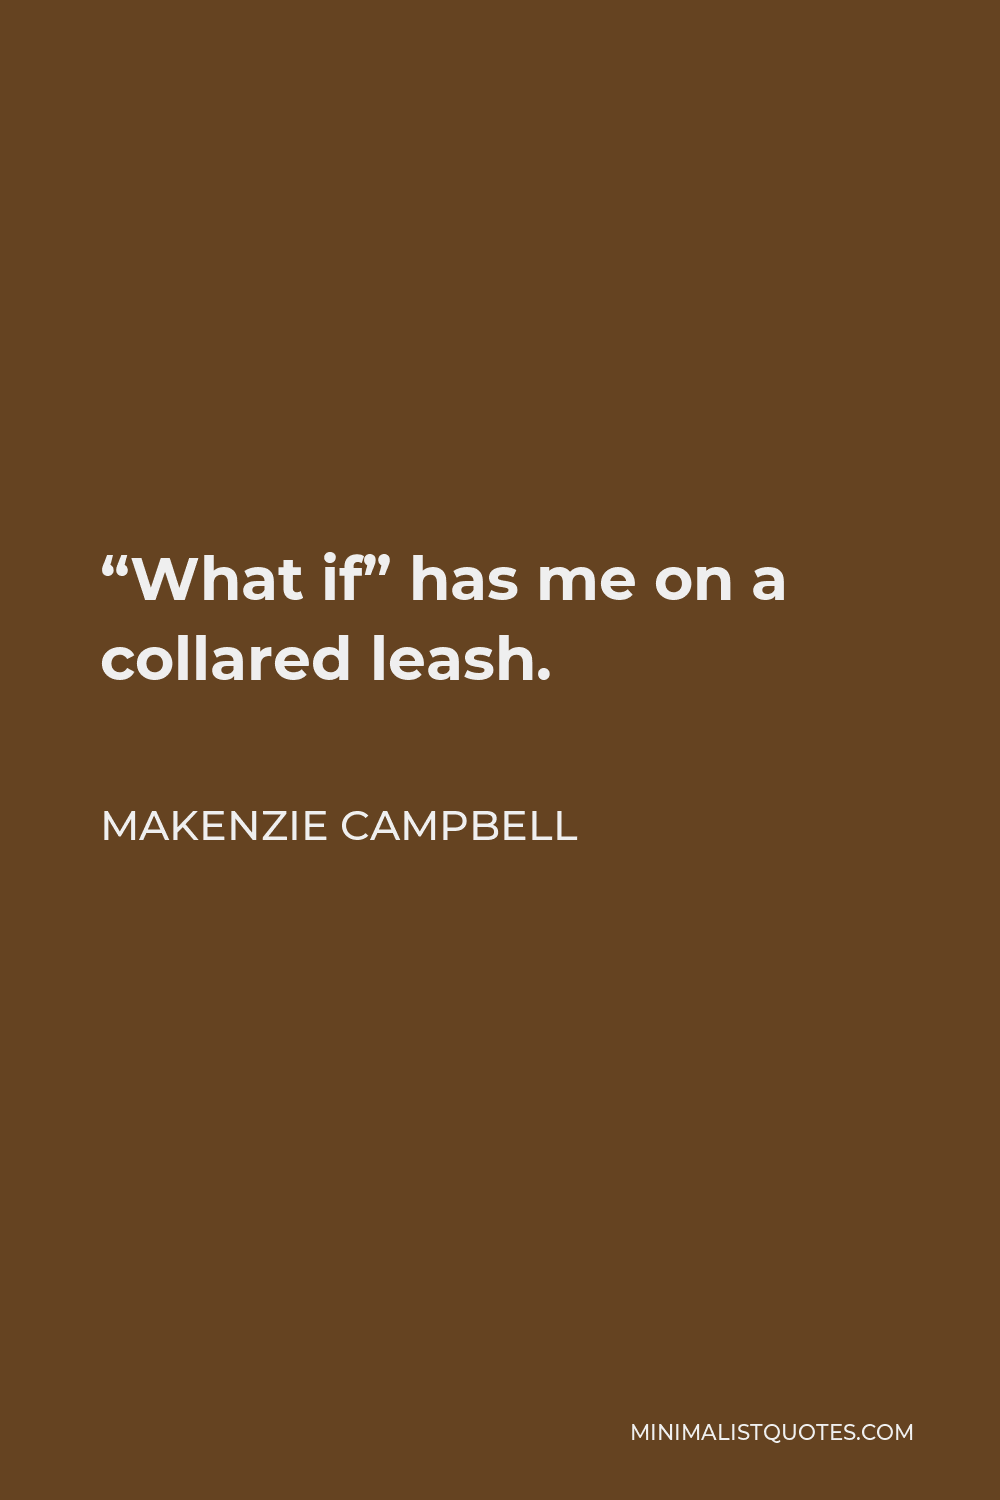 Makenzie Campbell Quote - “What if” has me on a collared leash.